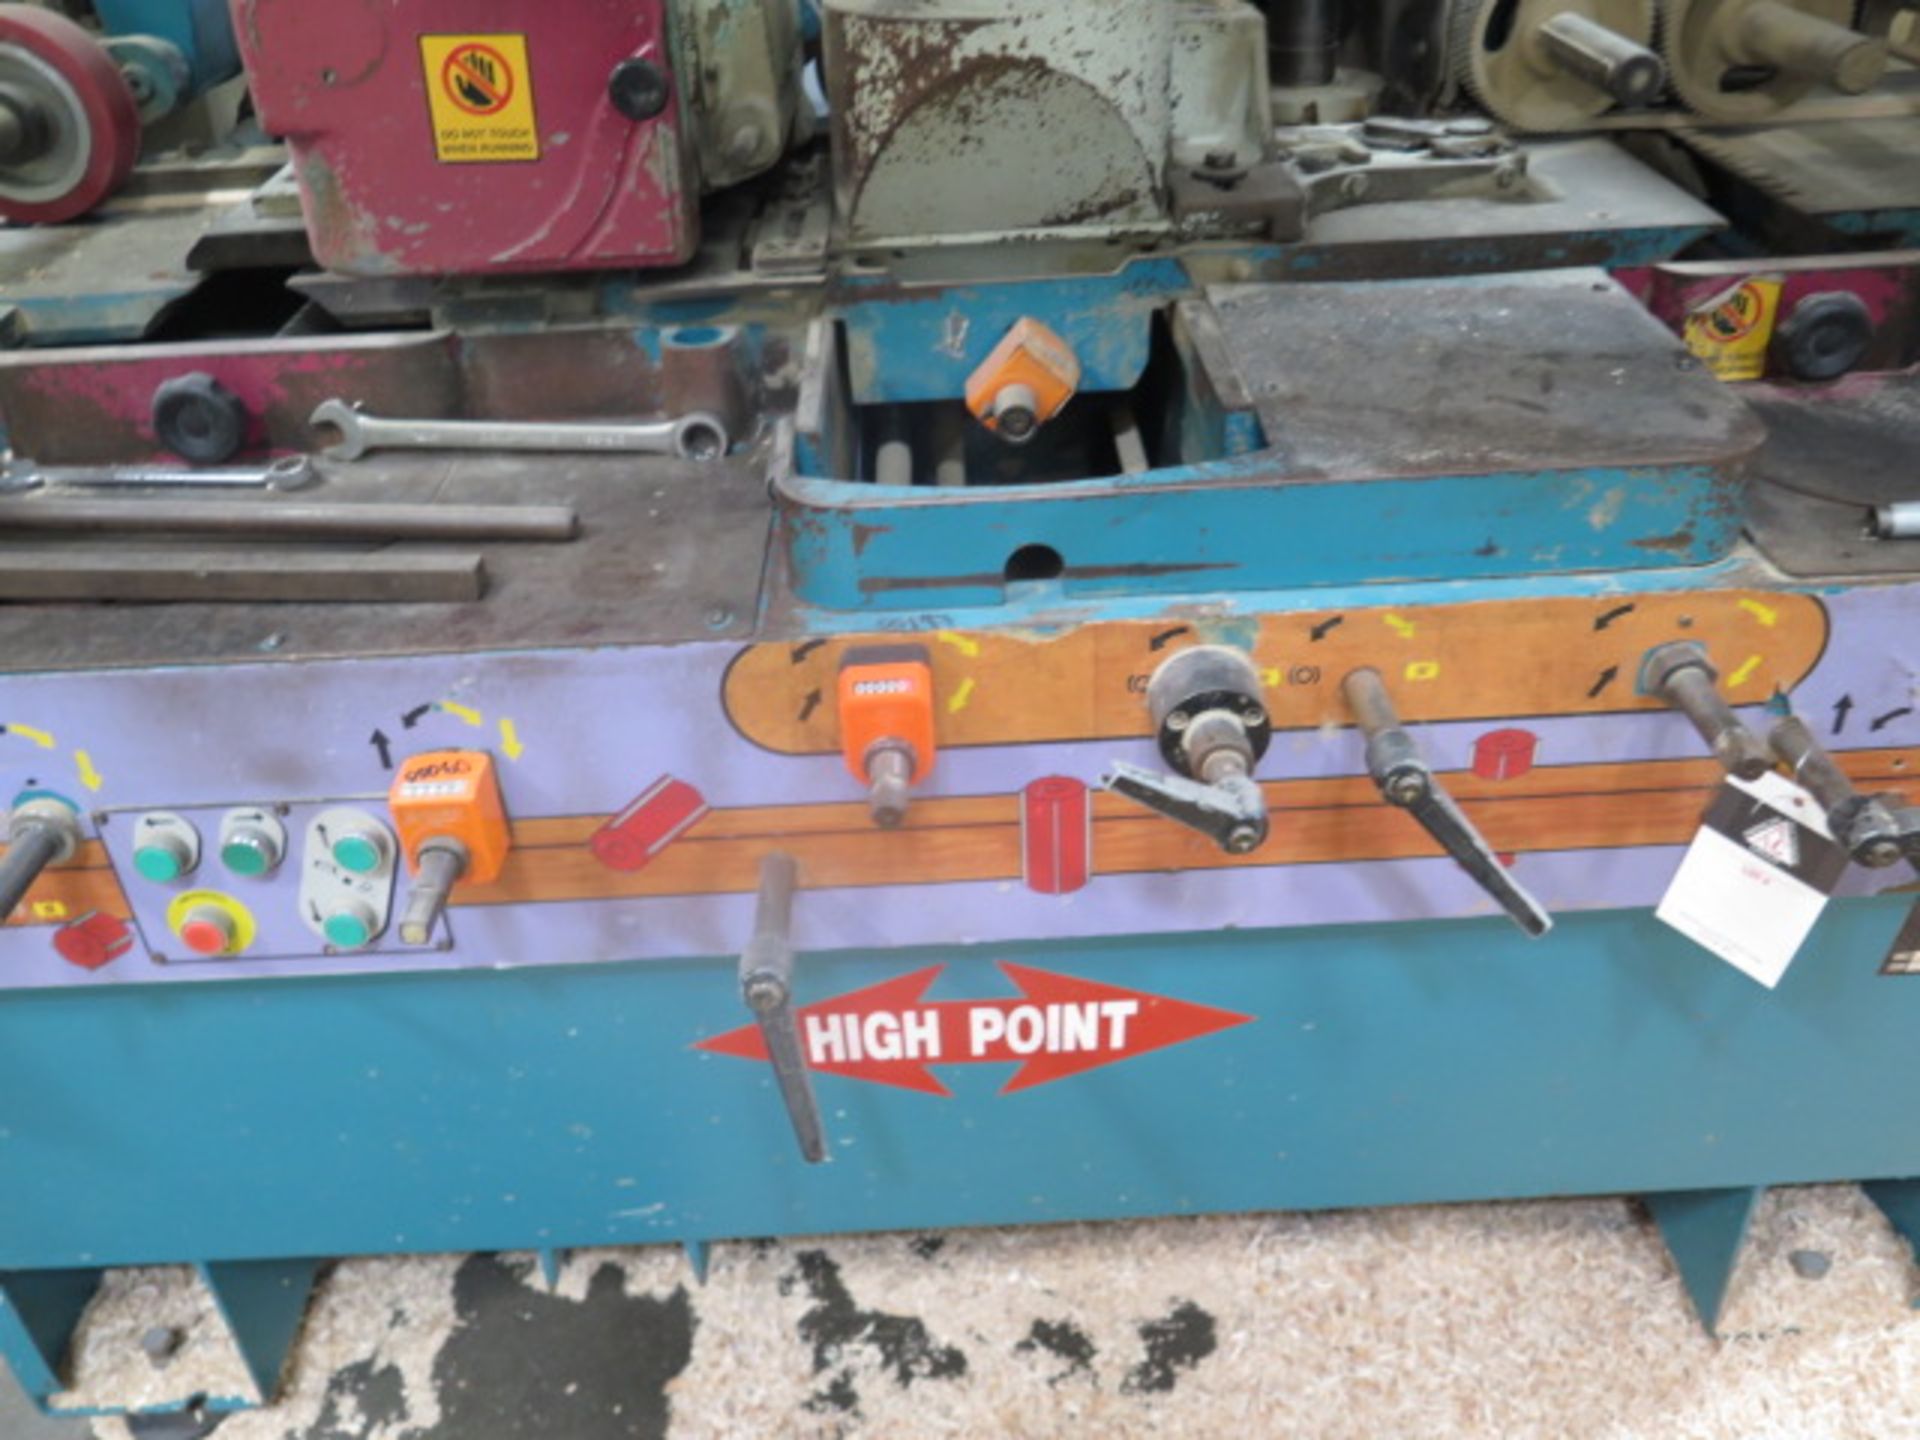 High Point CM-555 Multi-Head Moulding Machine (NEEDS REPAIR) s/n 02A0254 w/ High Point, SOLD AS IS - Image 9 of 15